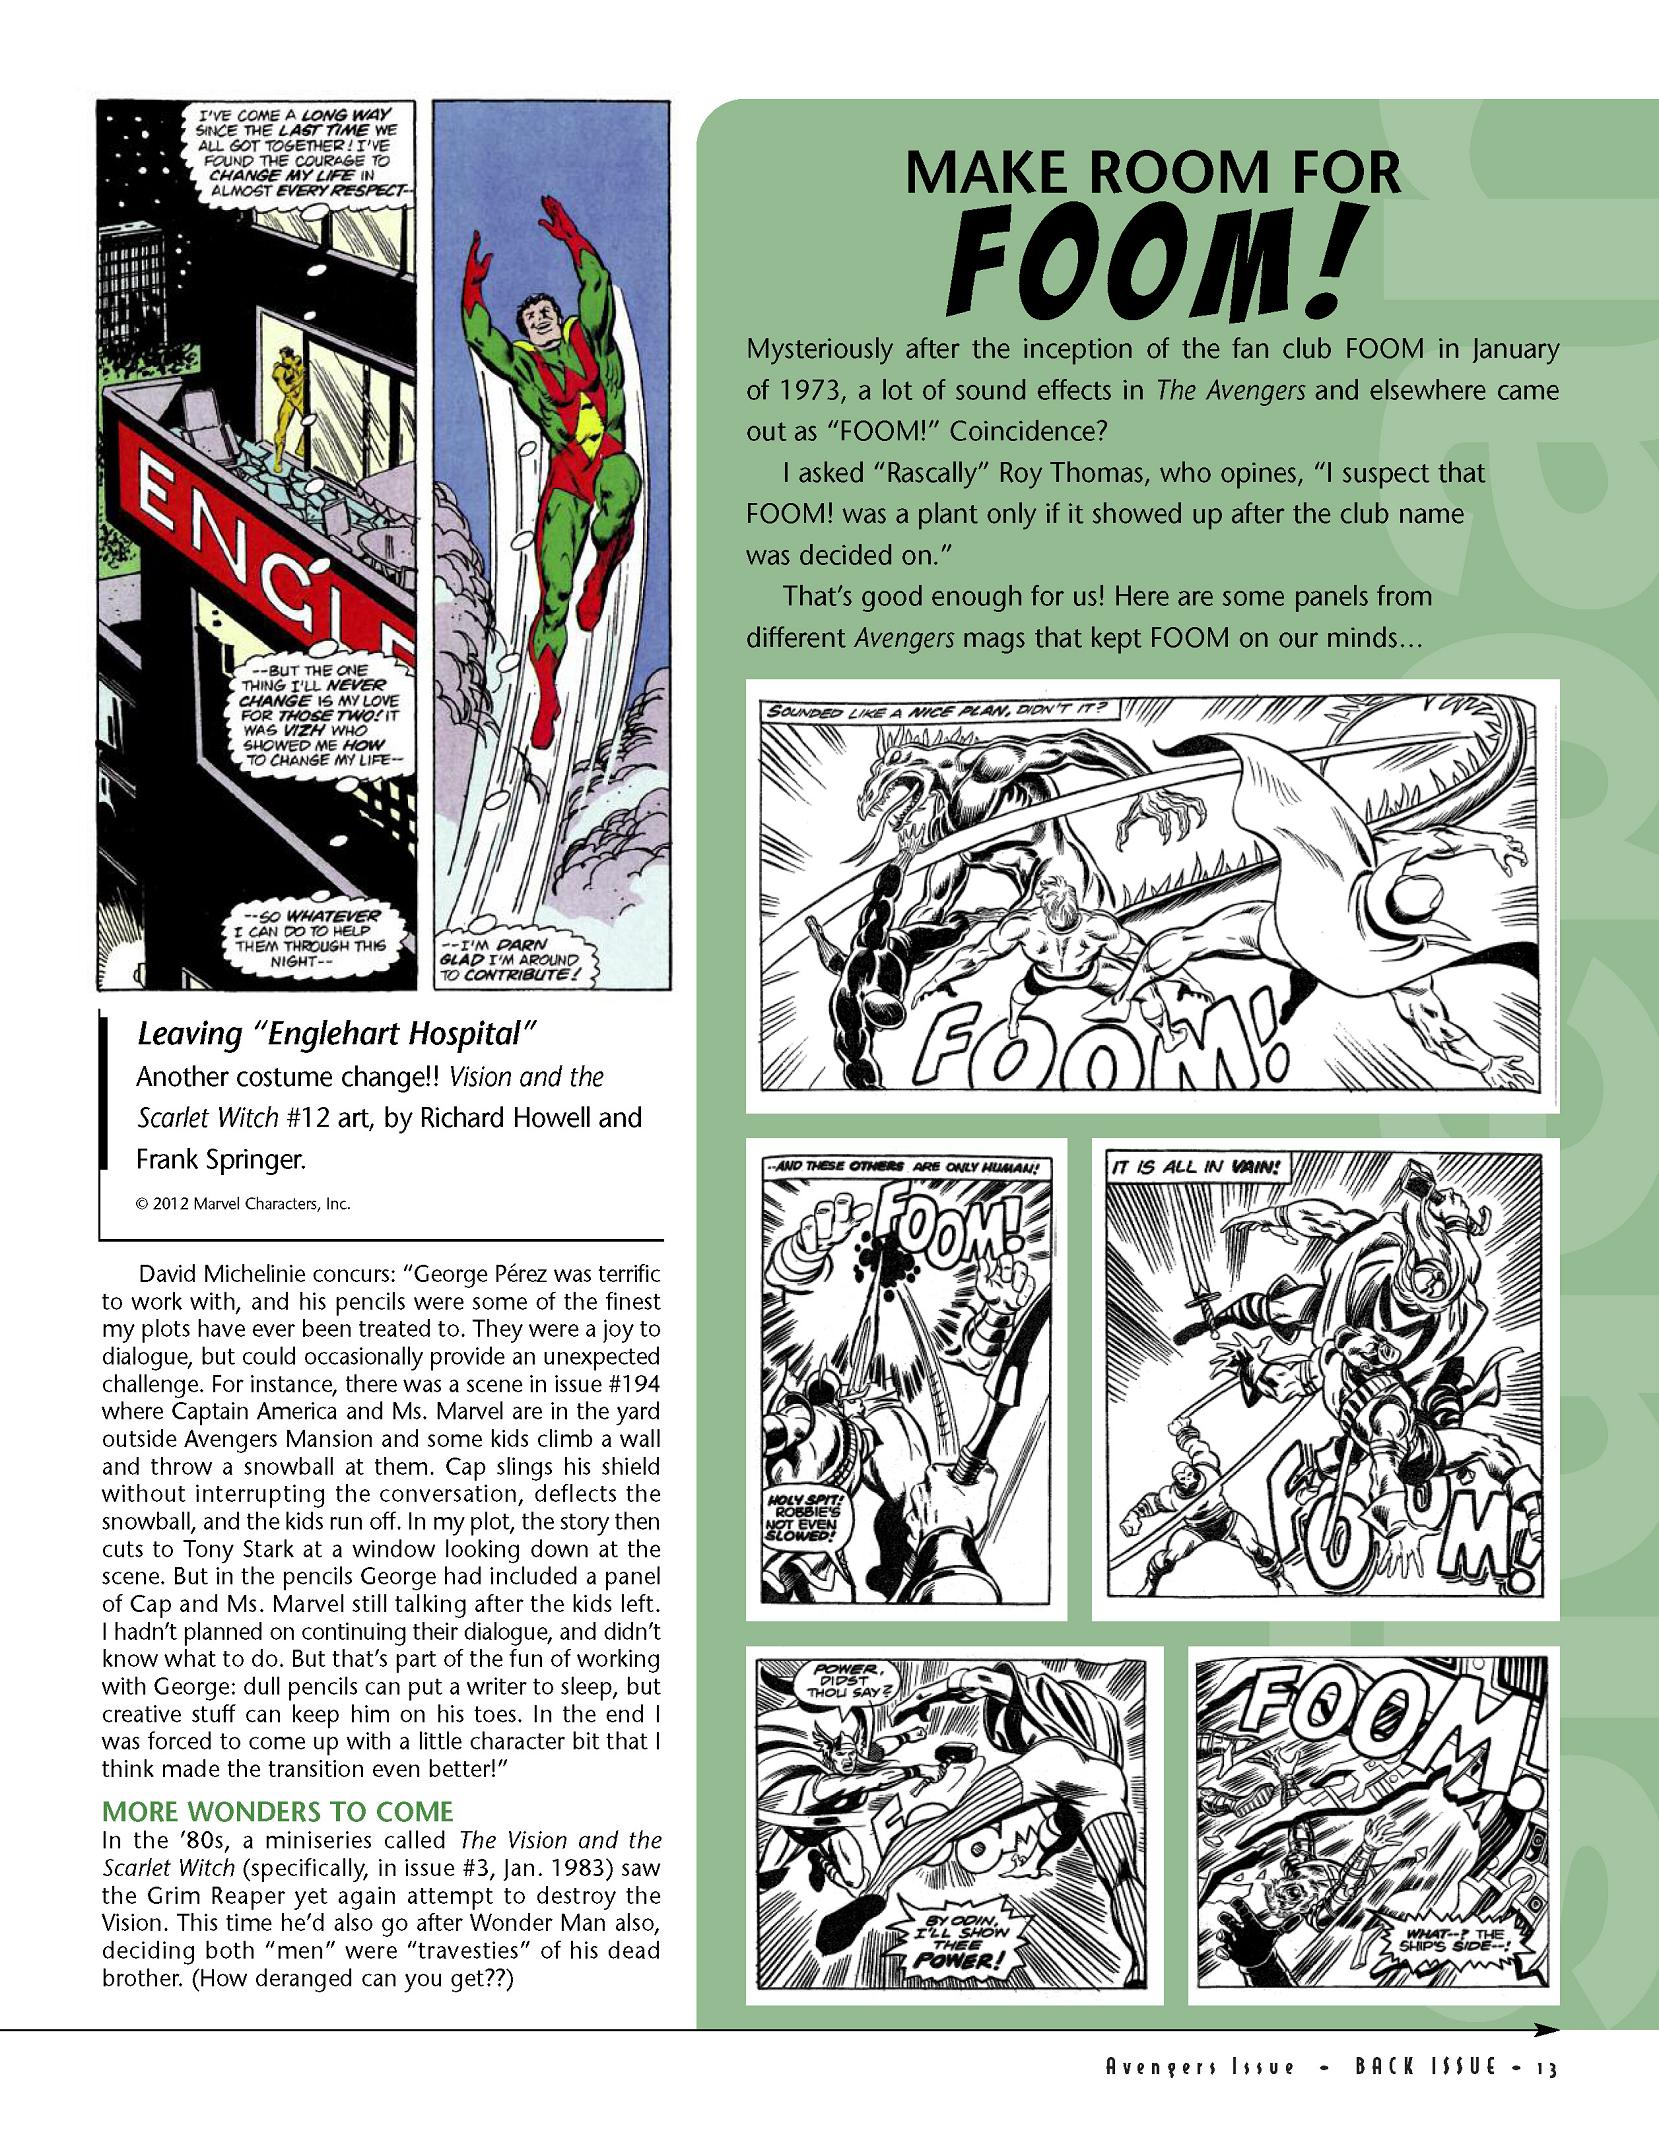 Read online Back Issue comic -  Issue #56 - 14